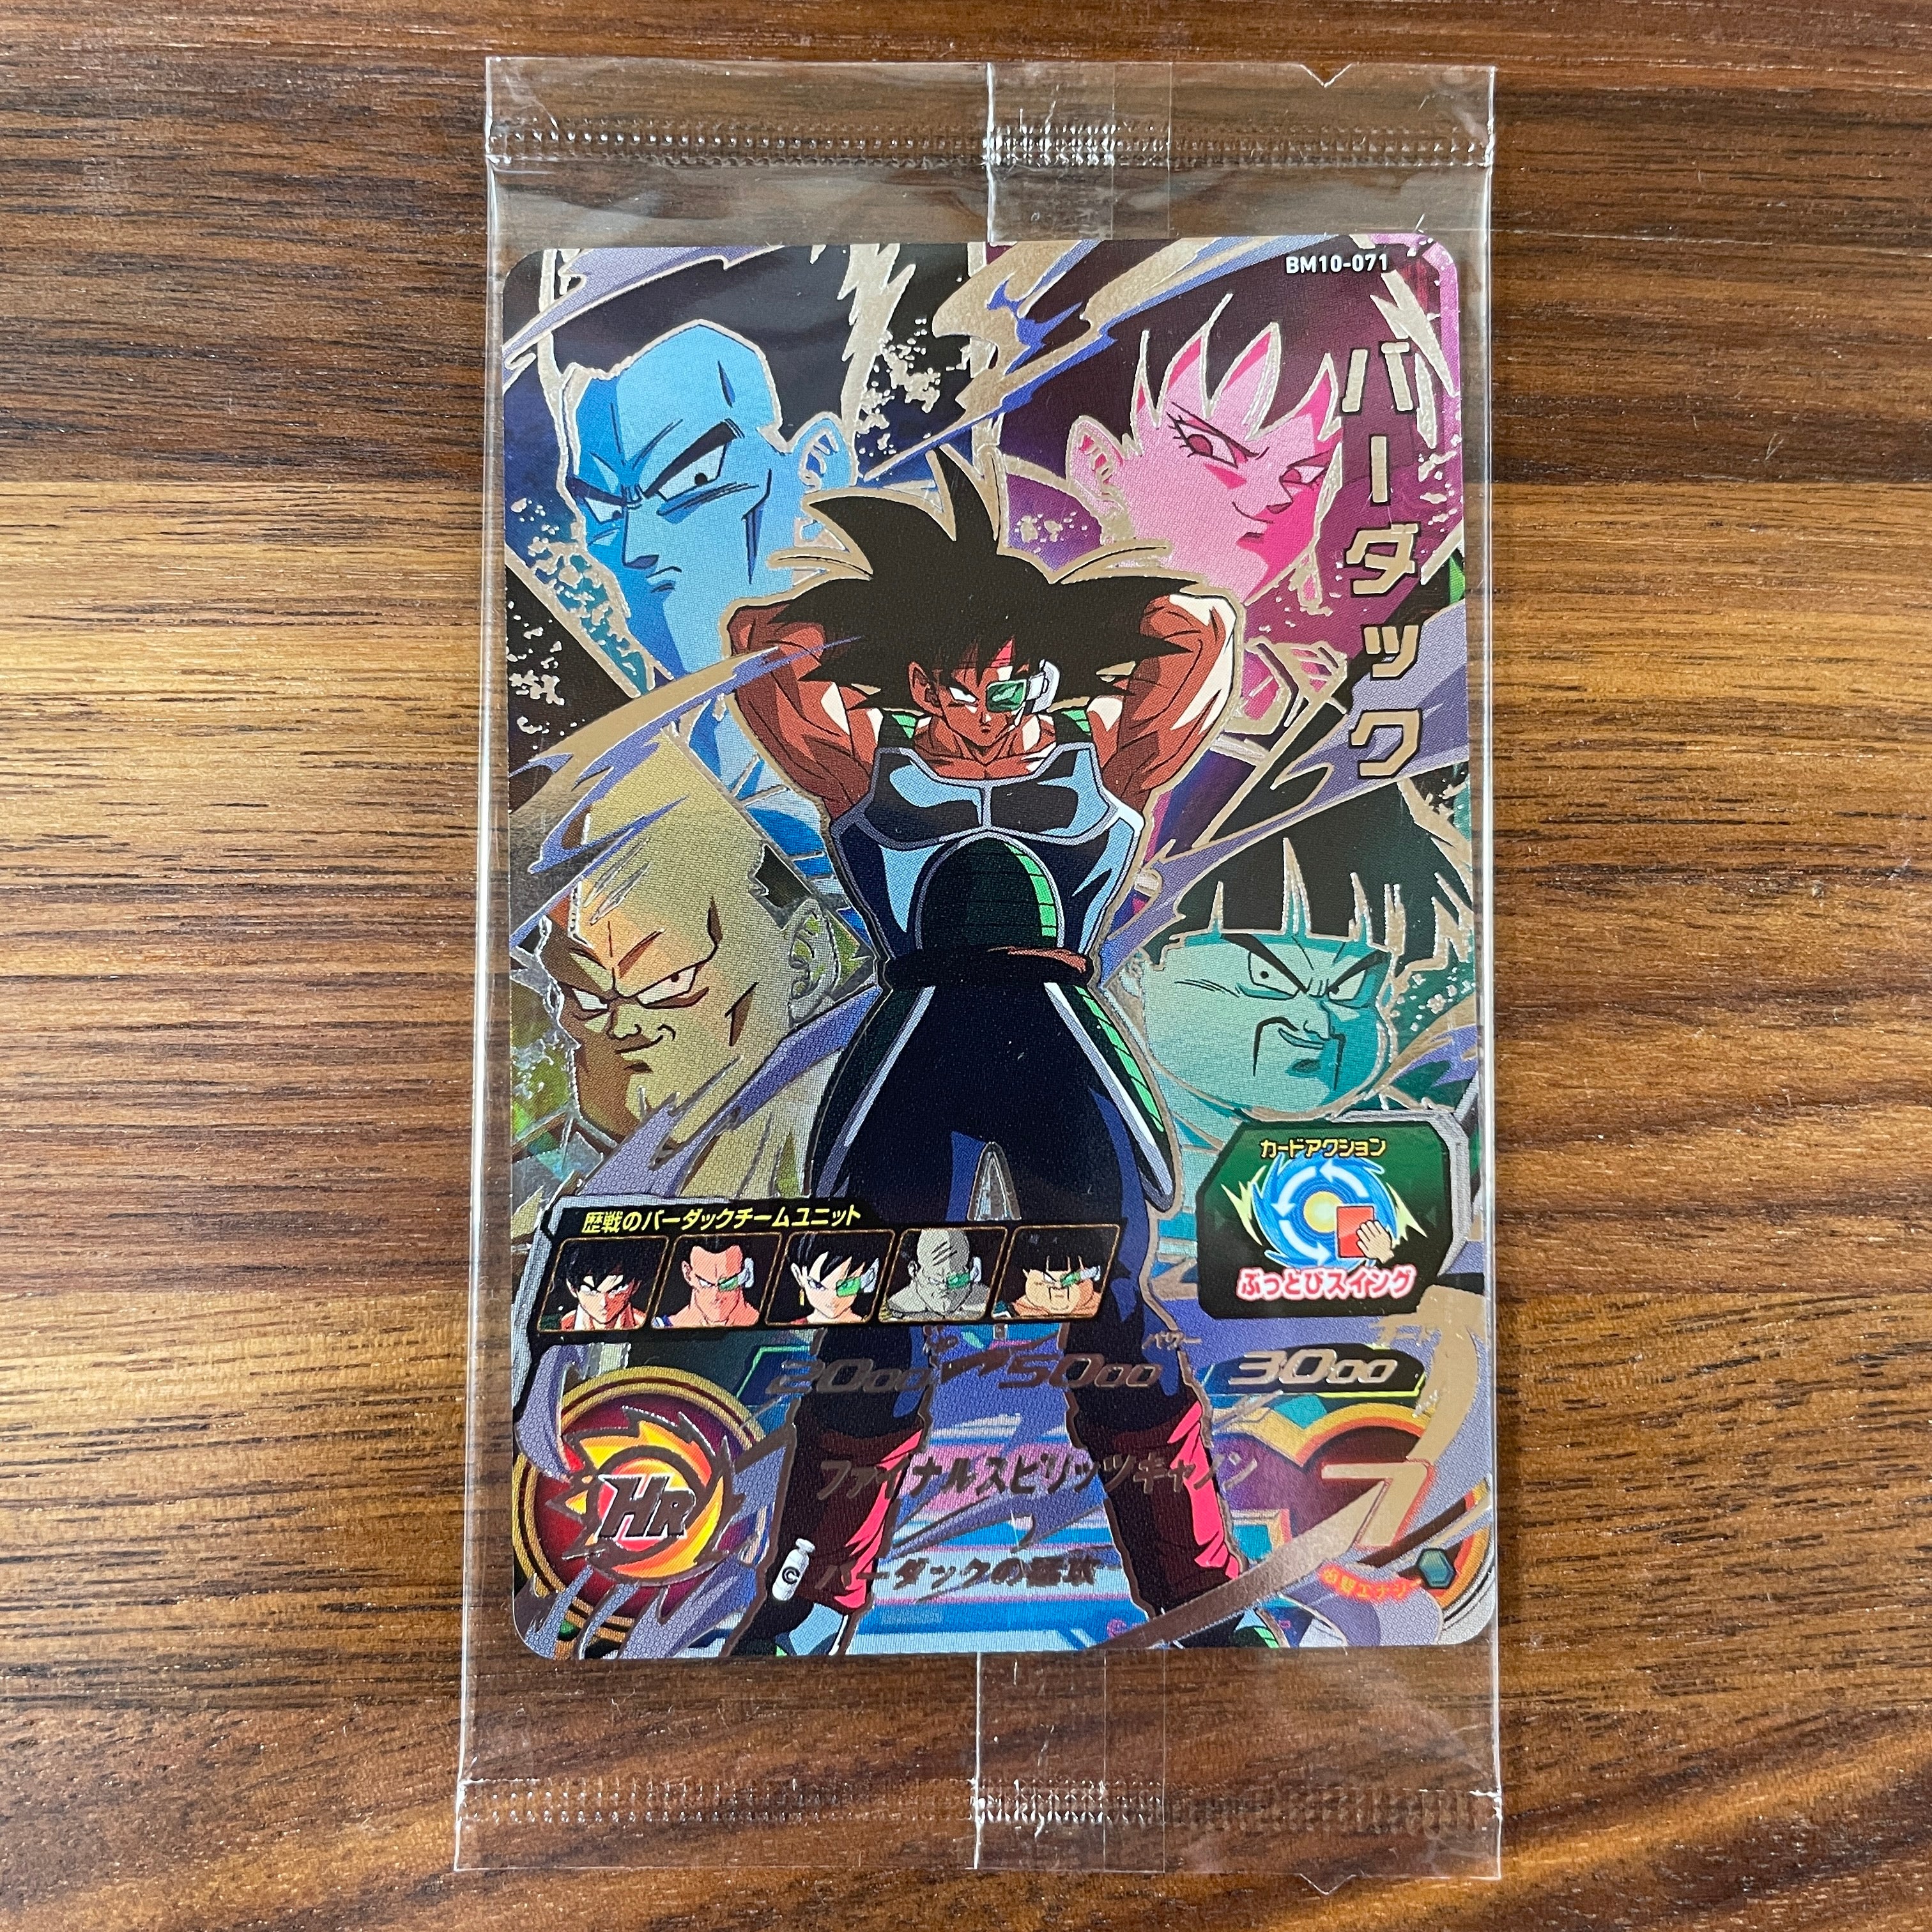 SUPER DRAGON BALL HEROES BM10-071 Ultimate Rare card in blister  Bardock  UR card but promotional card